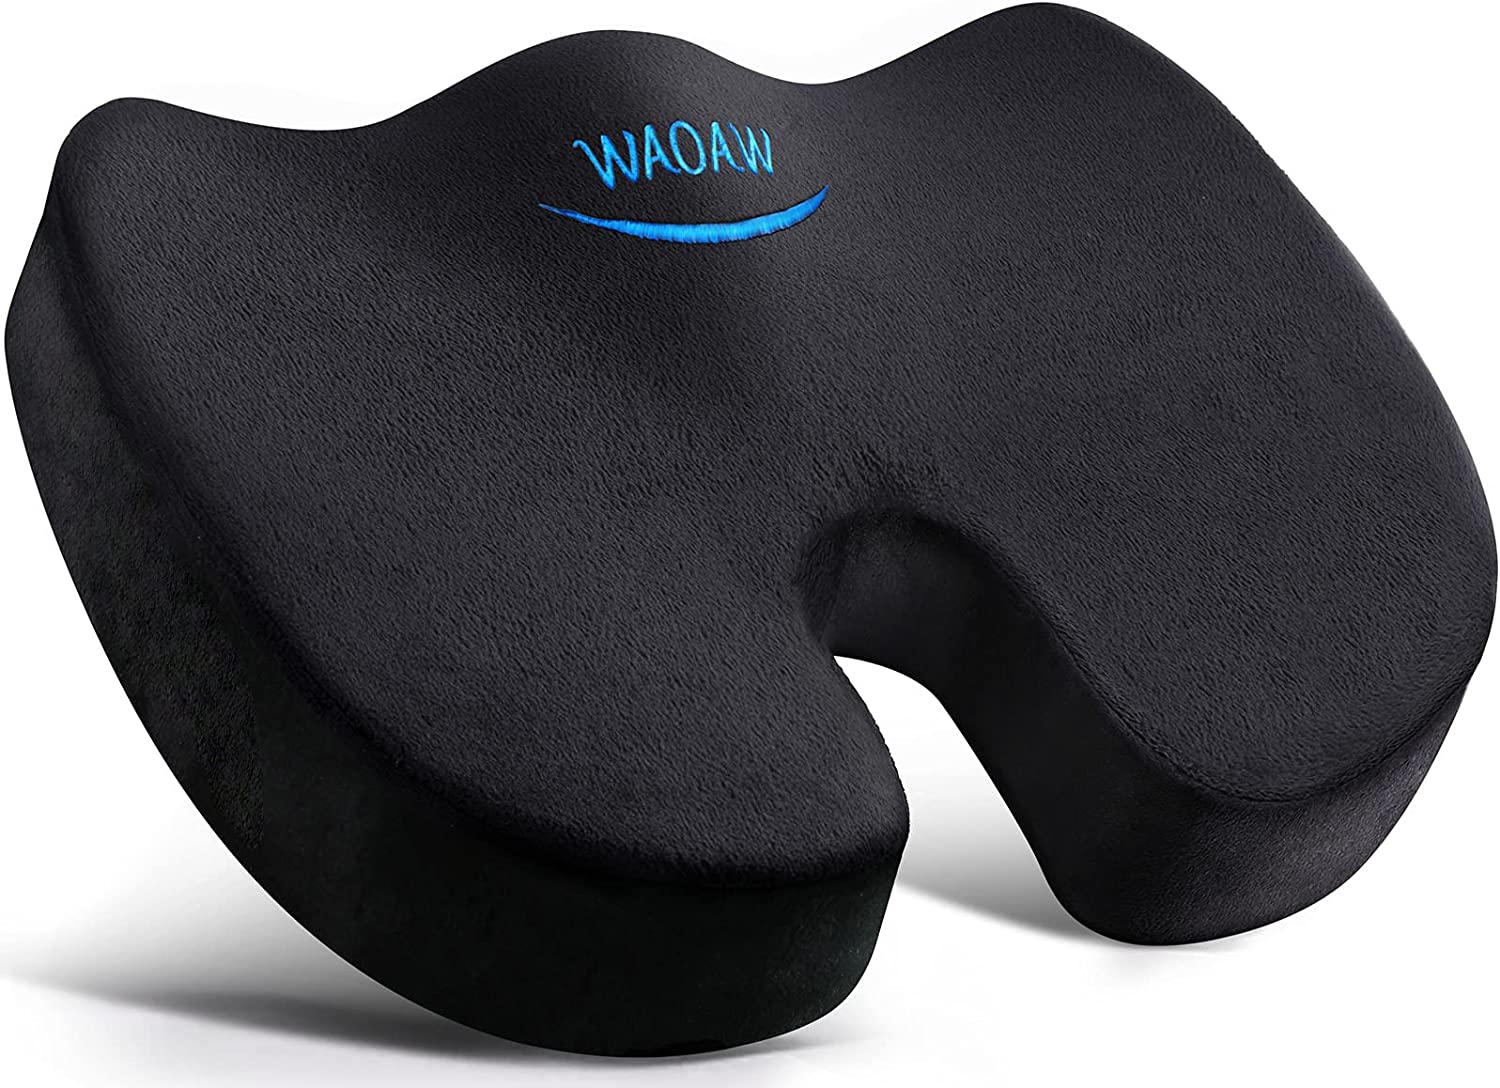 https://discounttoday.net/wp-content/uploads/2022/09/WAOAW-Seat-Cushion-Office-Chair-Cushions-Butt-Pillow-for-Long-Sitting-Memory-Foam-Chair-Pad-for-Back-Coccyx-Tailbone-Pain-Relief.jpg